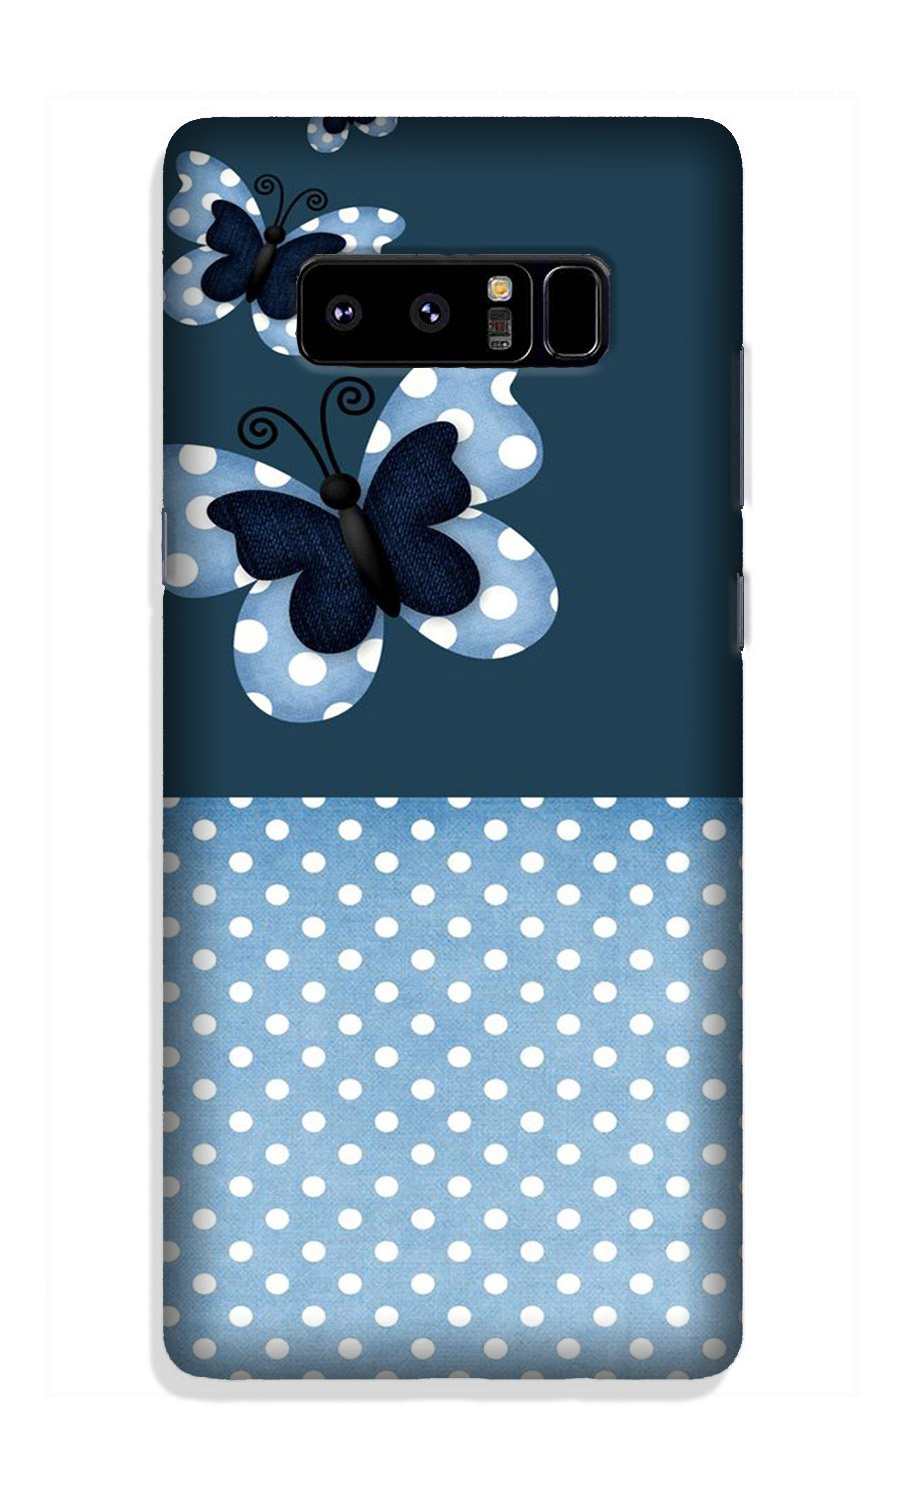 White dots Butterfly Case for Galaxy Note 8